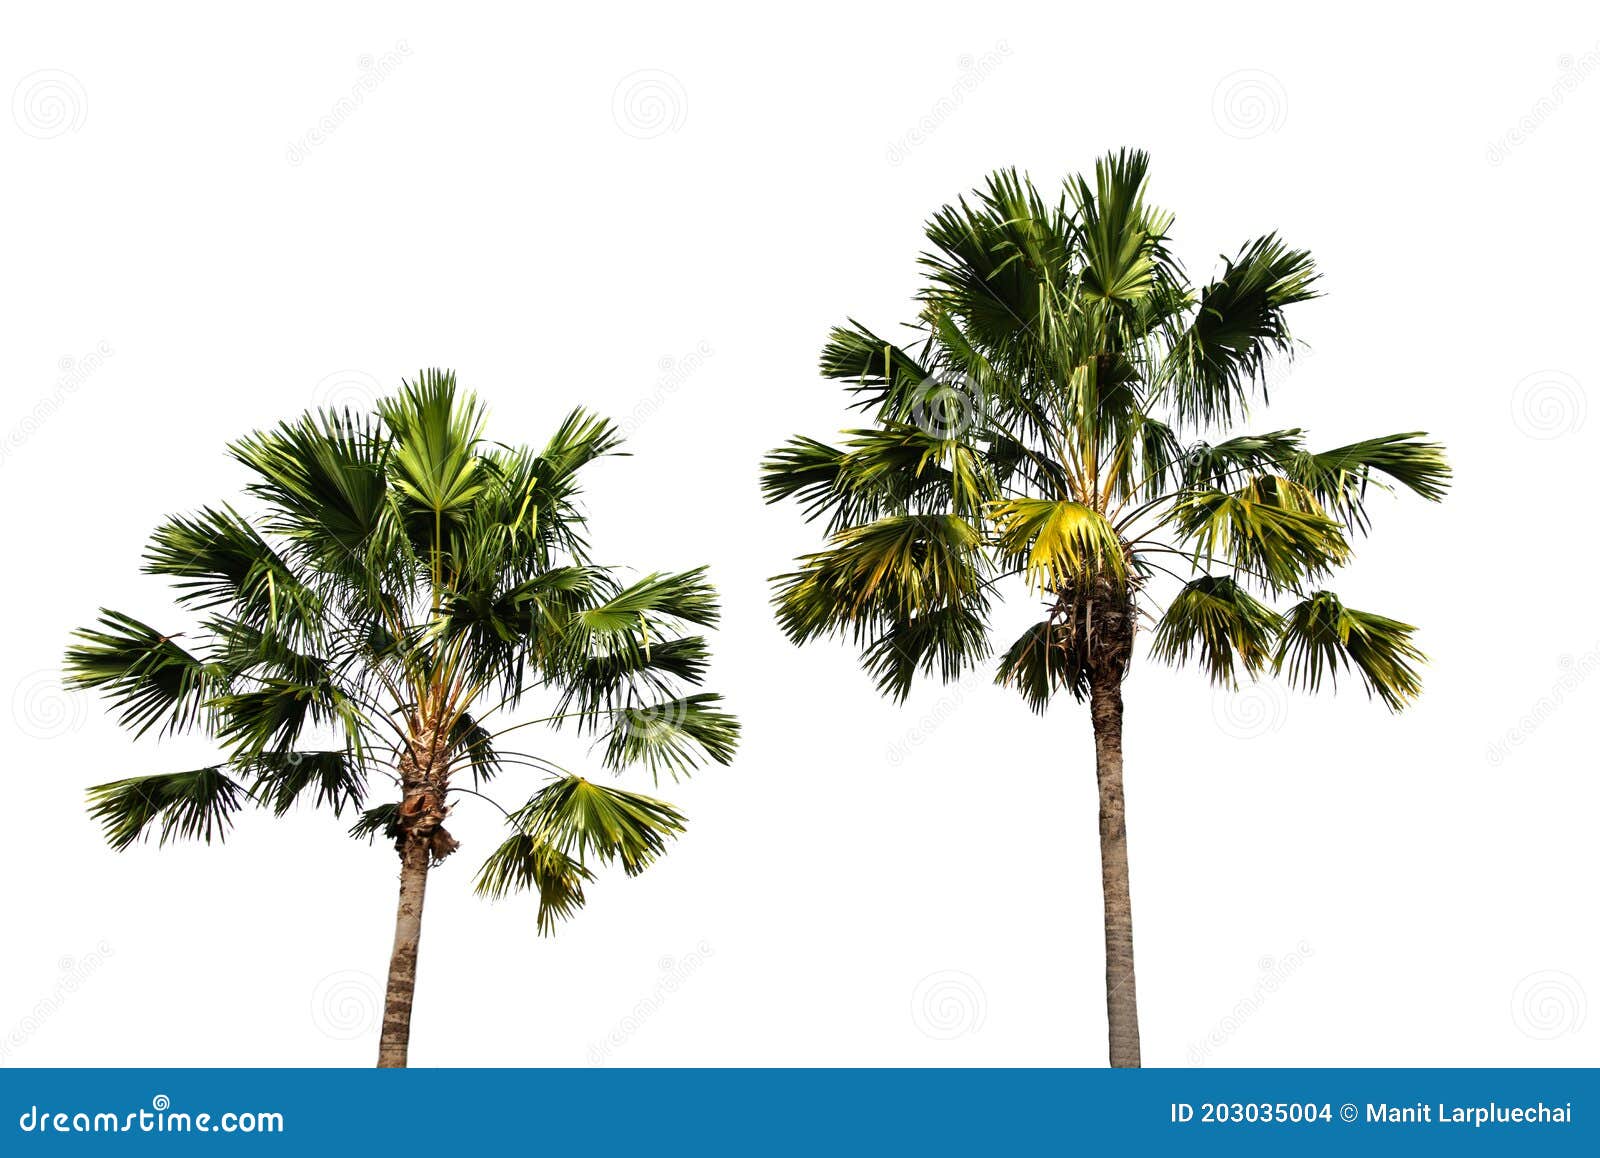 palm tree  on white background with clipping paths for garden .